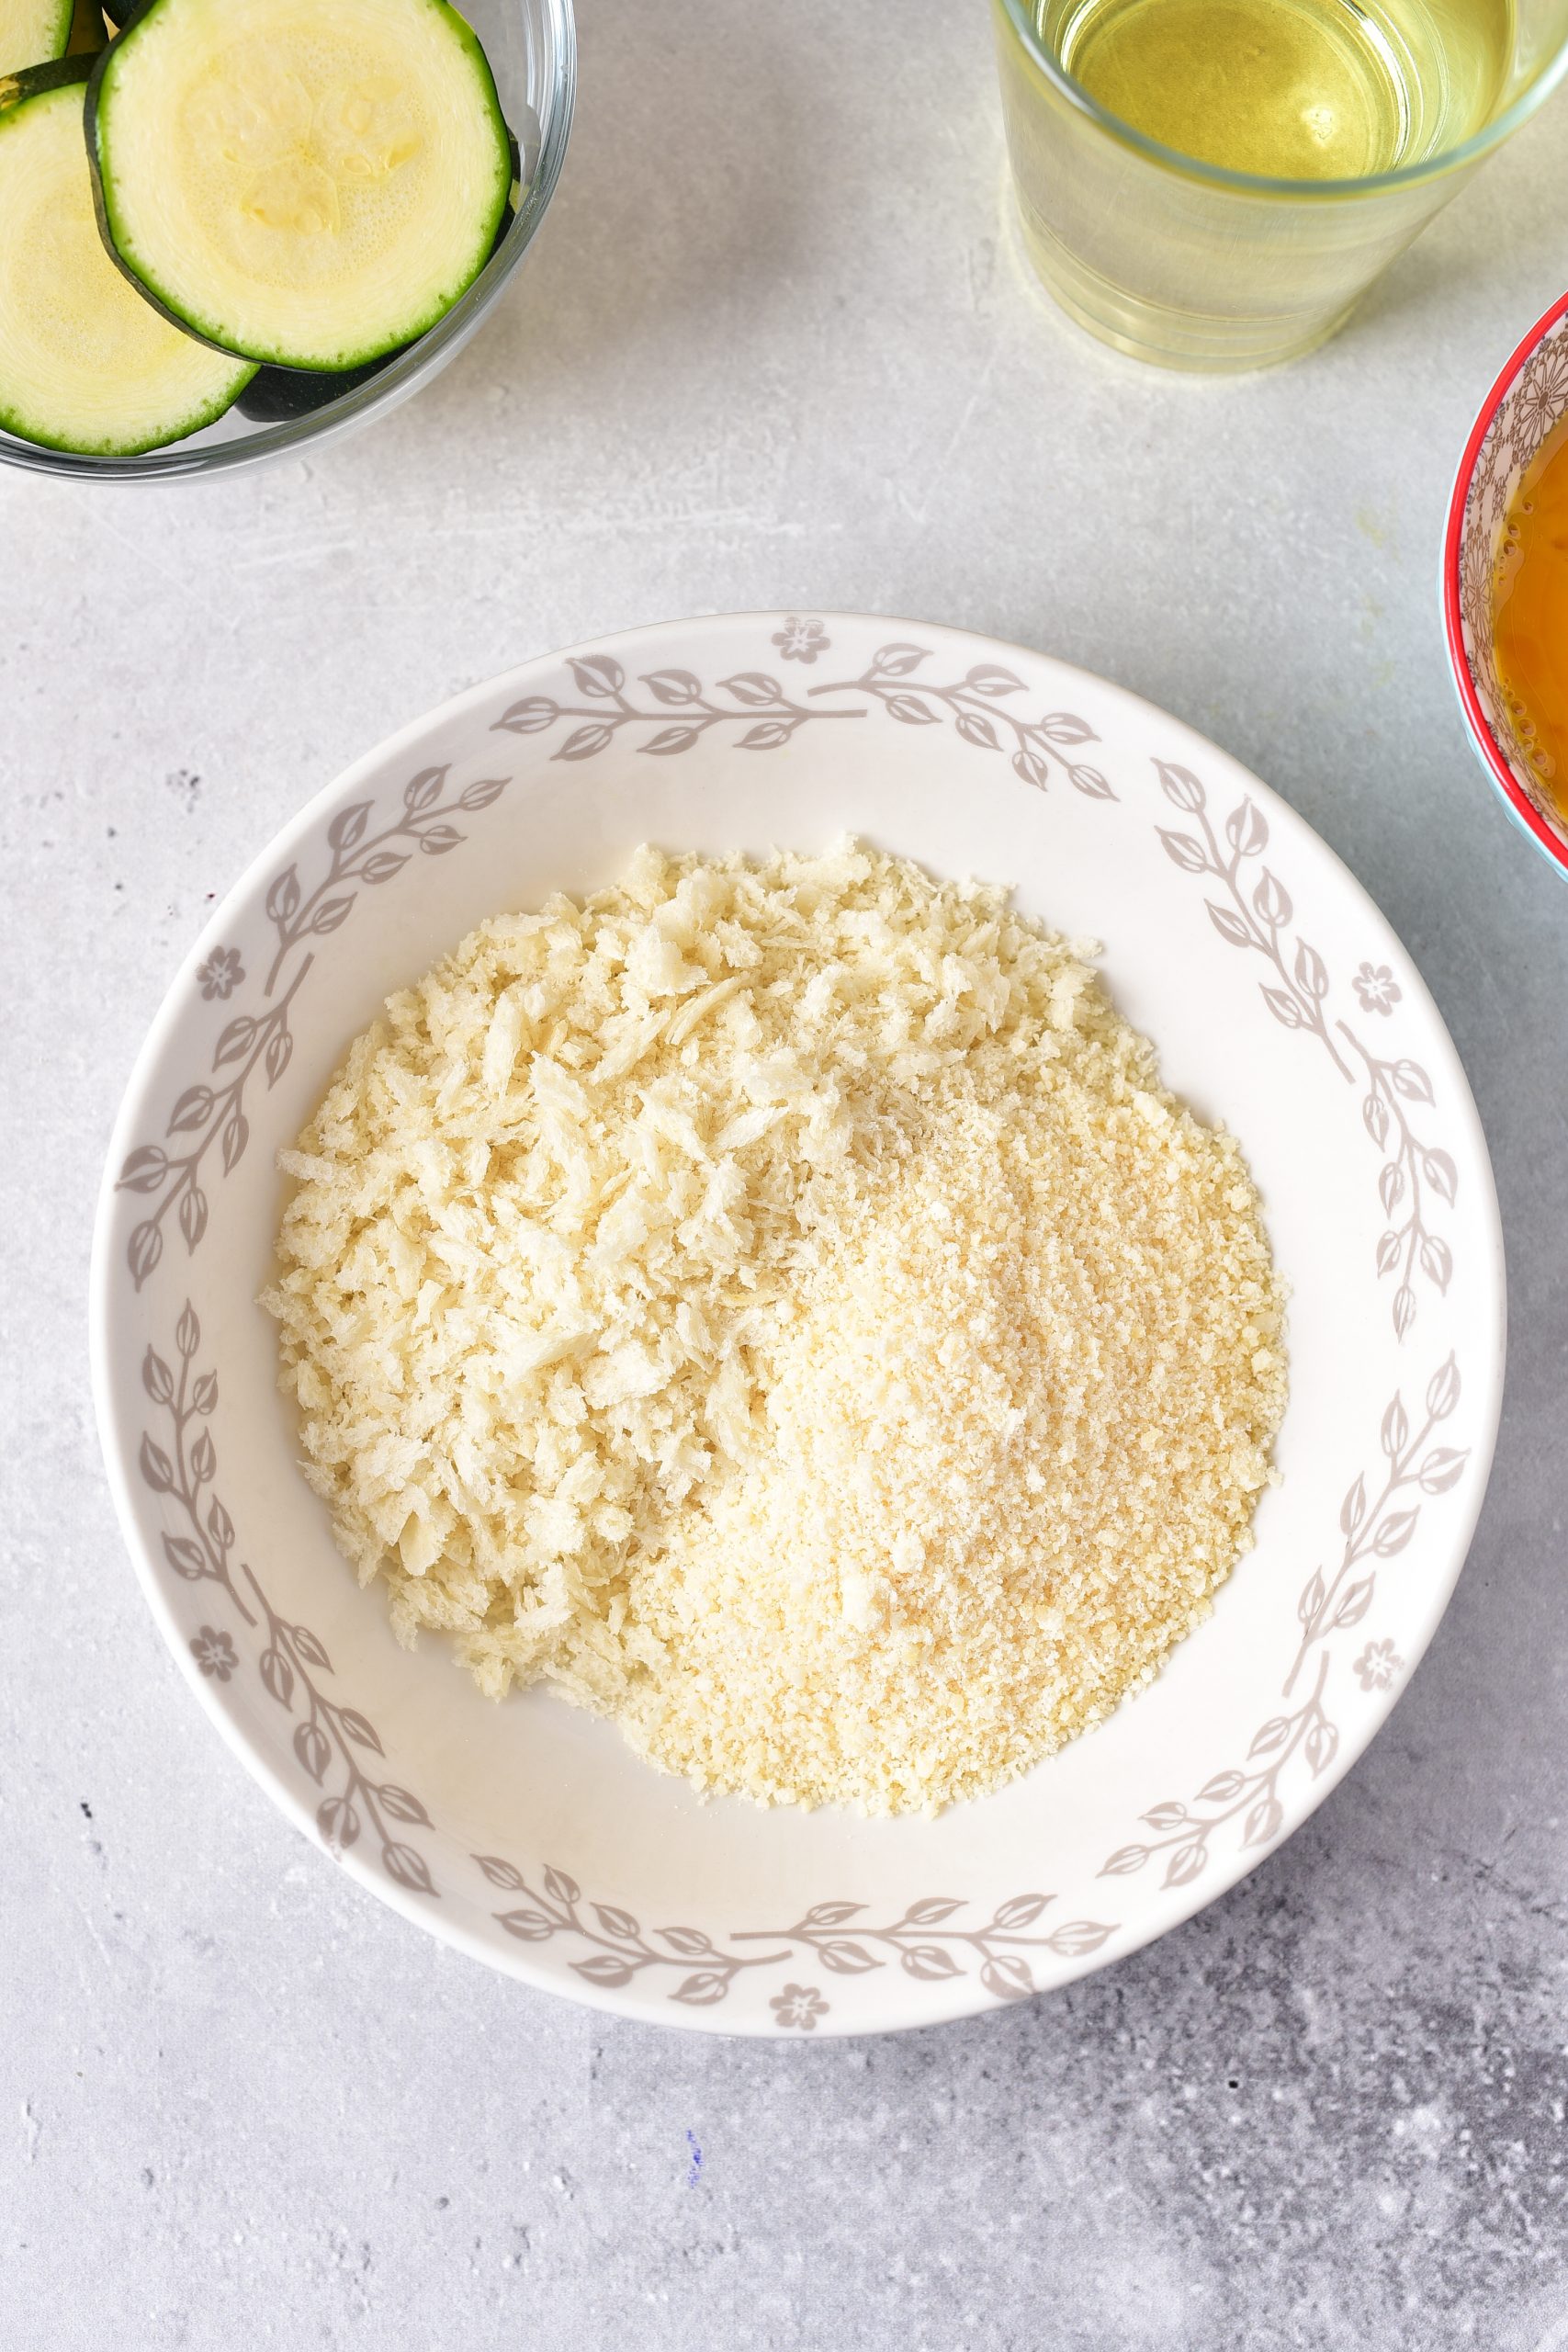 Add the flour to one shallow bowl, the beaten eggs to another, and the panko and parmesan cheese together in a third.